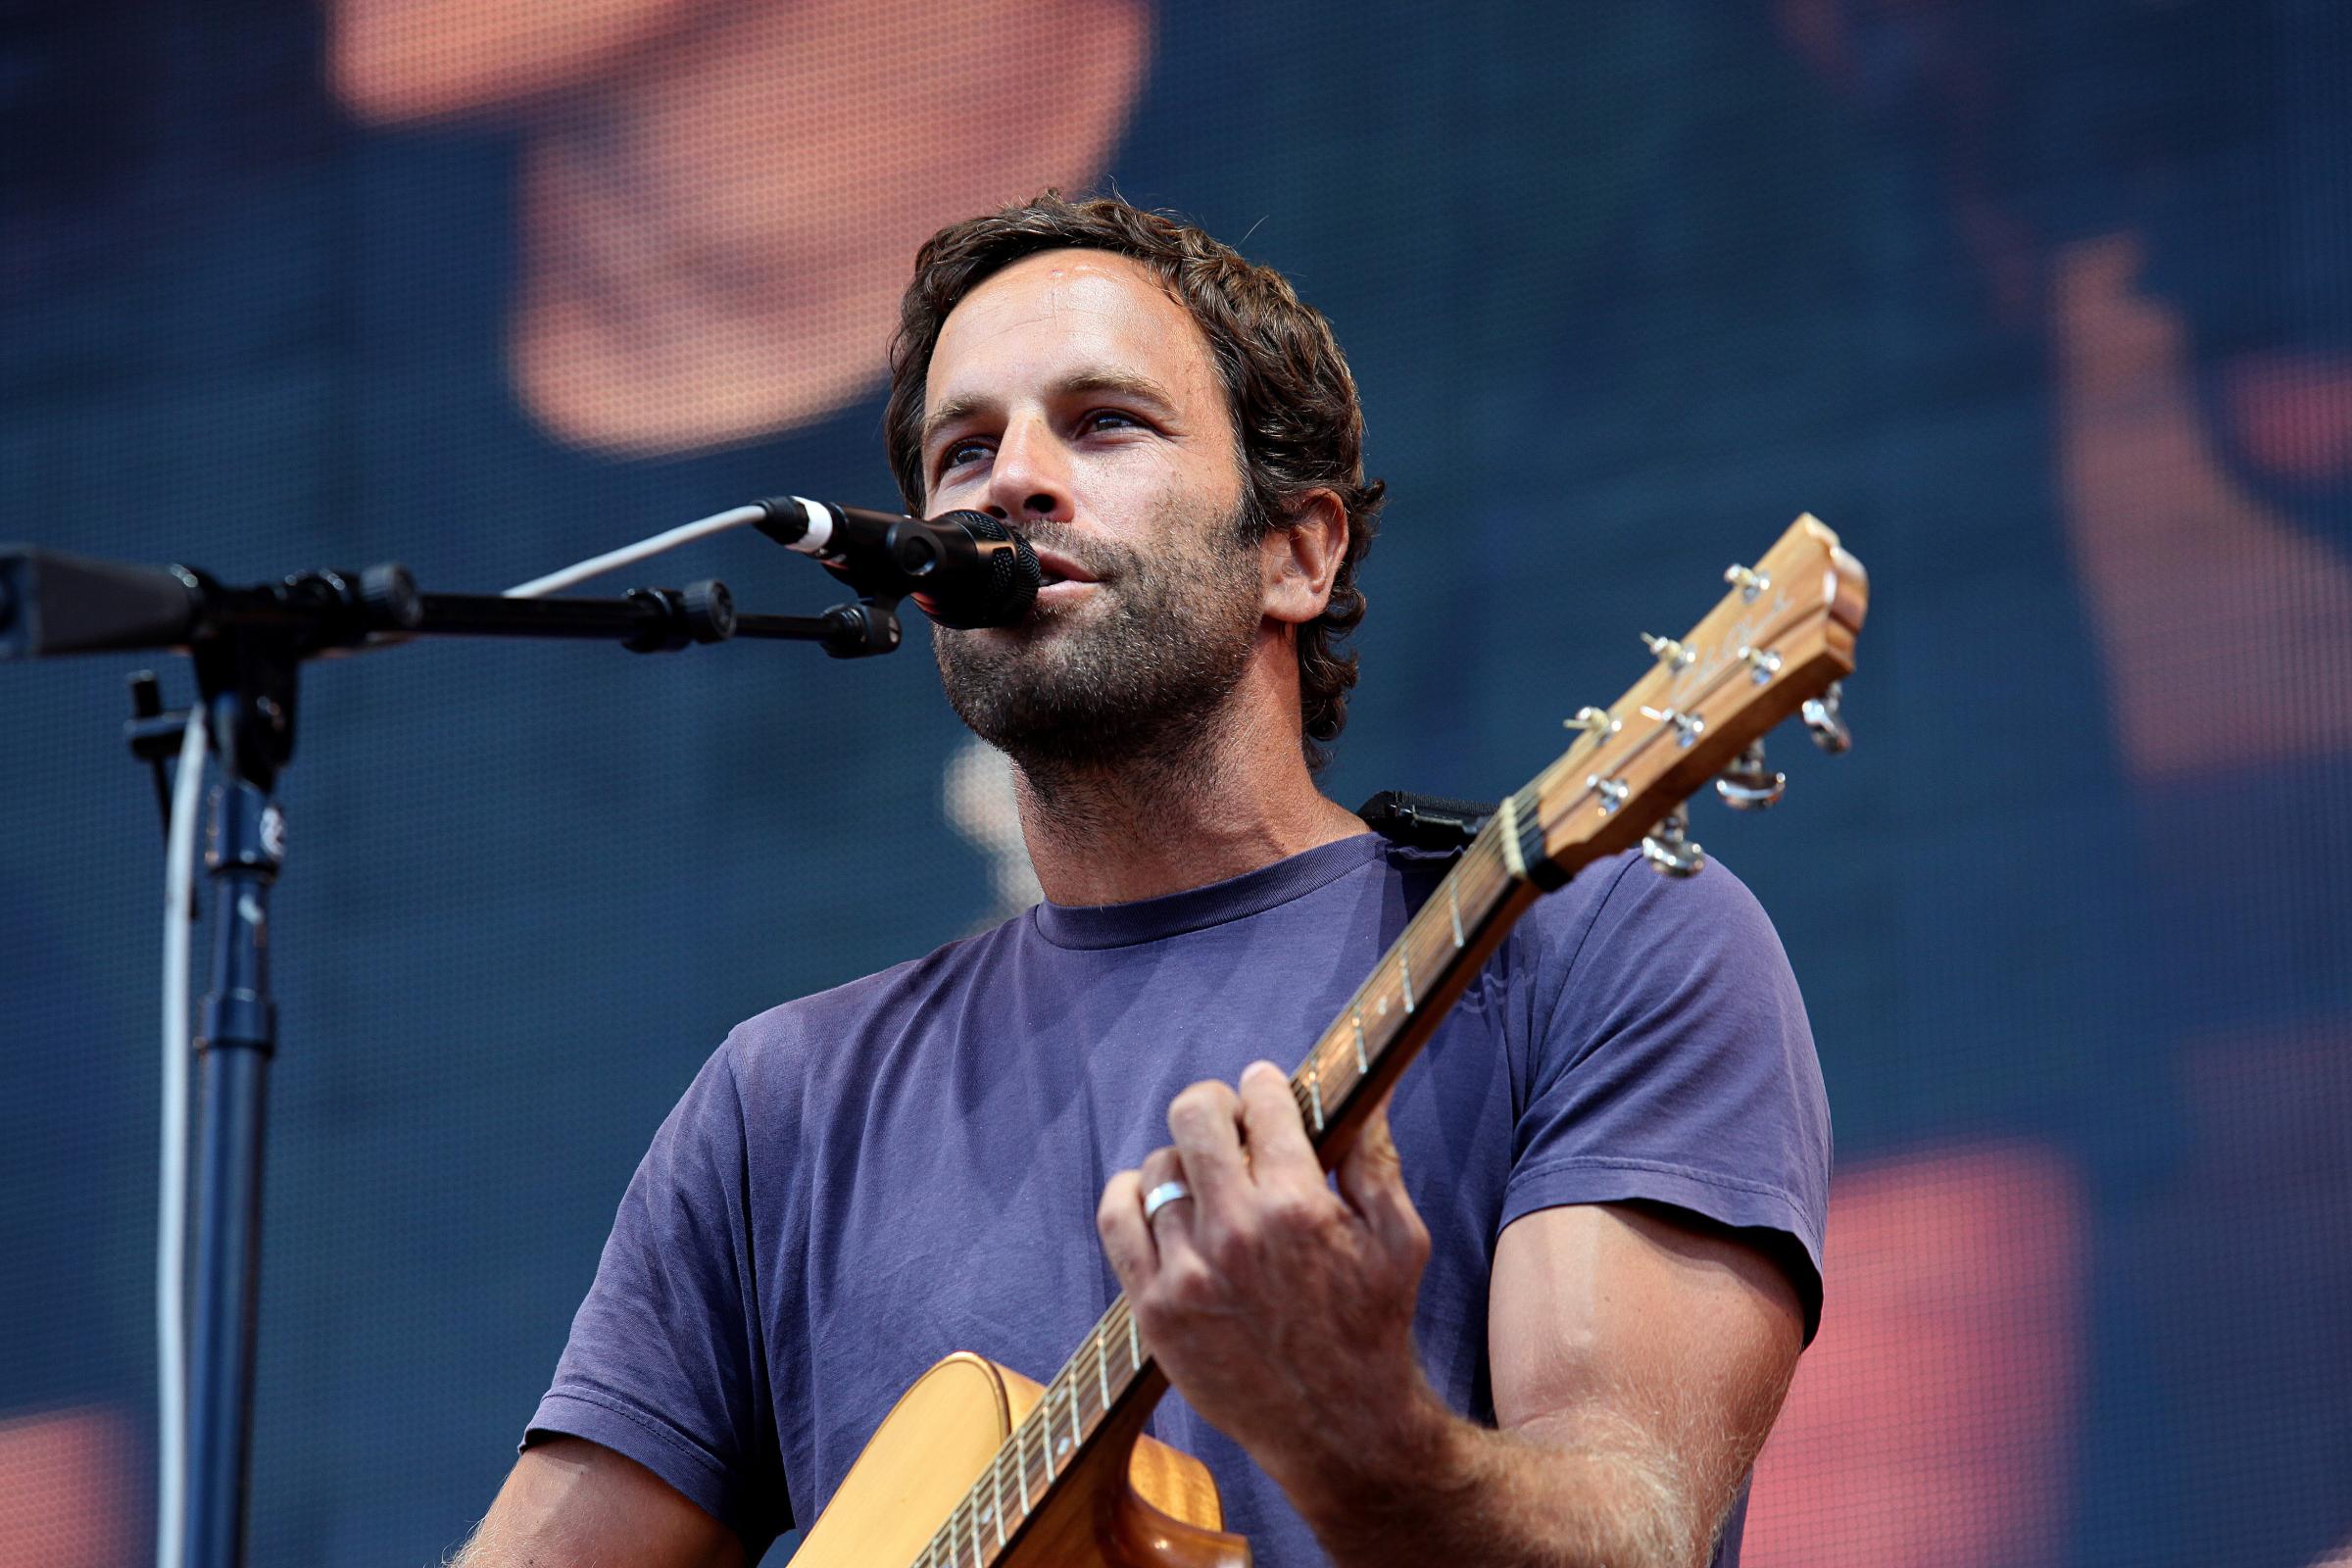 Jack Johnson performs at FirstMerit Bank Pavilion at Northerly Island during 'Farm Aid 30' in Chicago on Sept. 19, 2015.